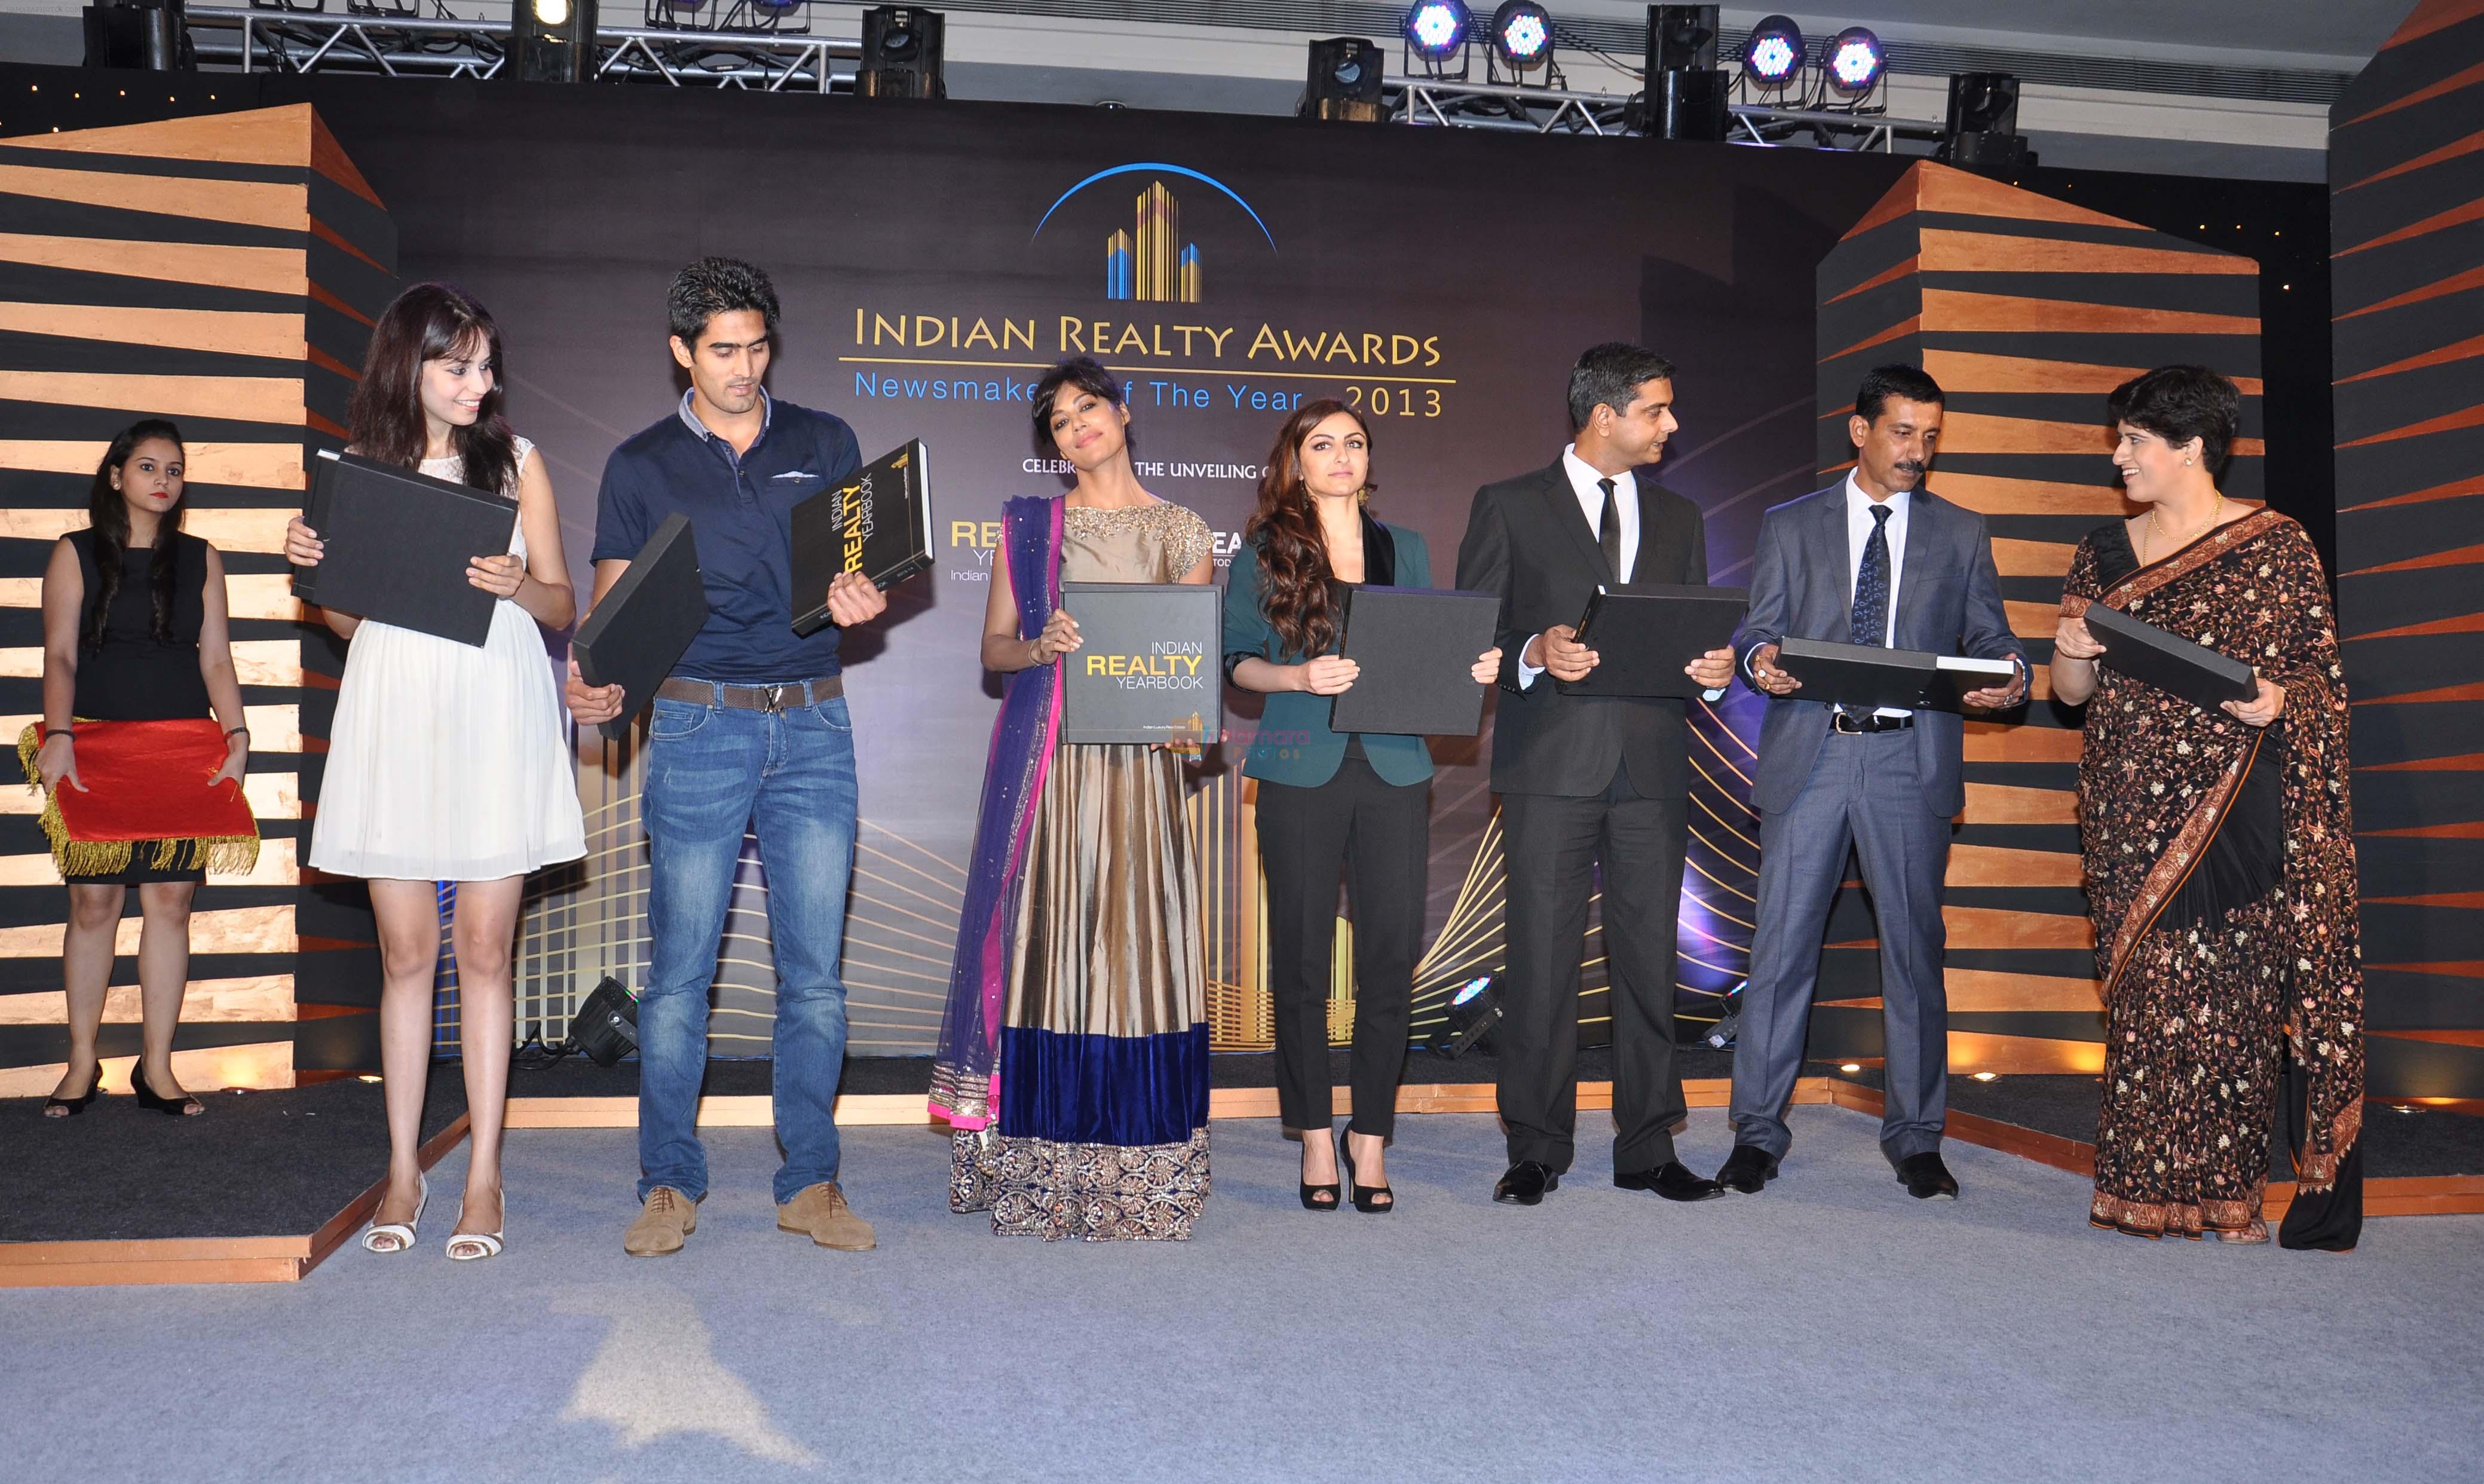 Chitrangada Singh, Soha Ali Khan, Vijender Singh launch India Realty Yearbook & Real Leaders at The premier Indian Realty Awards 2013 in New Delhi on 8th Oct 2013